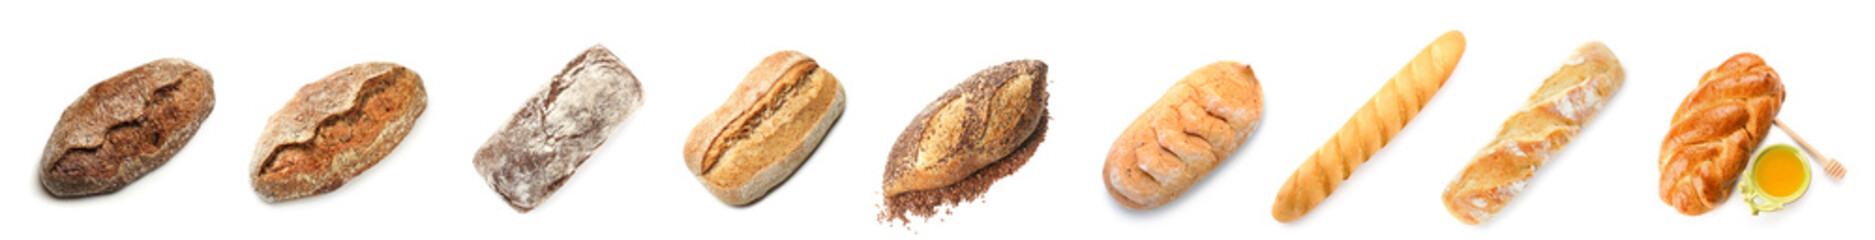 Collage of crusty loaves of bread on white background